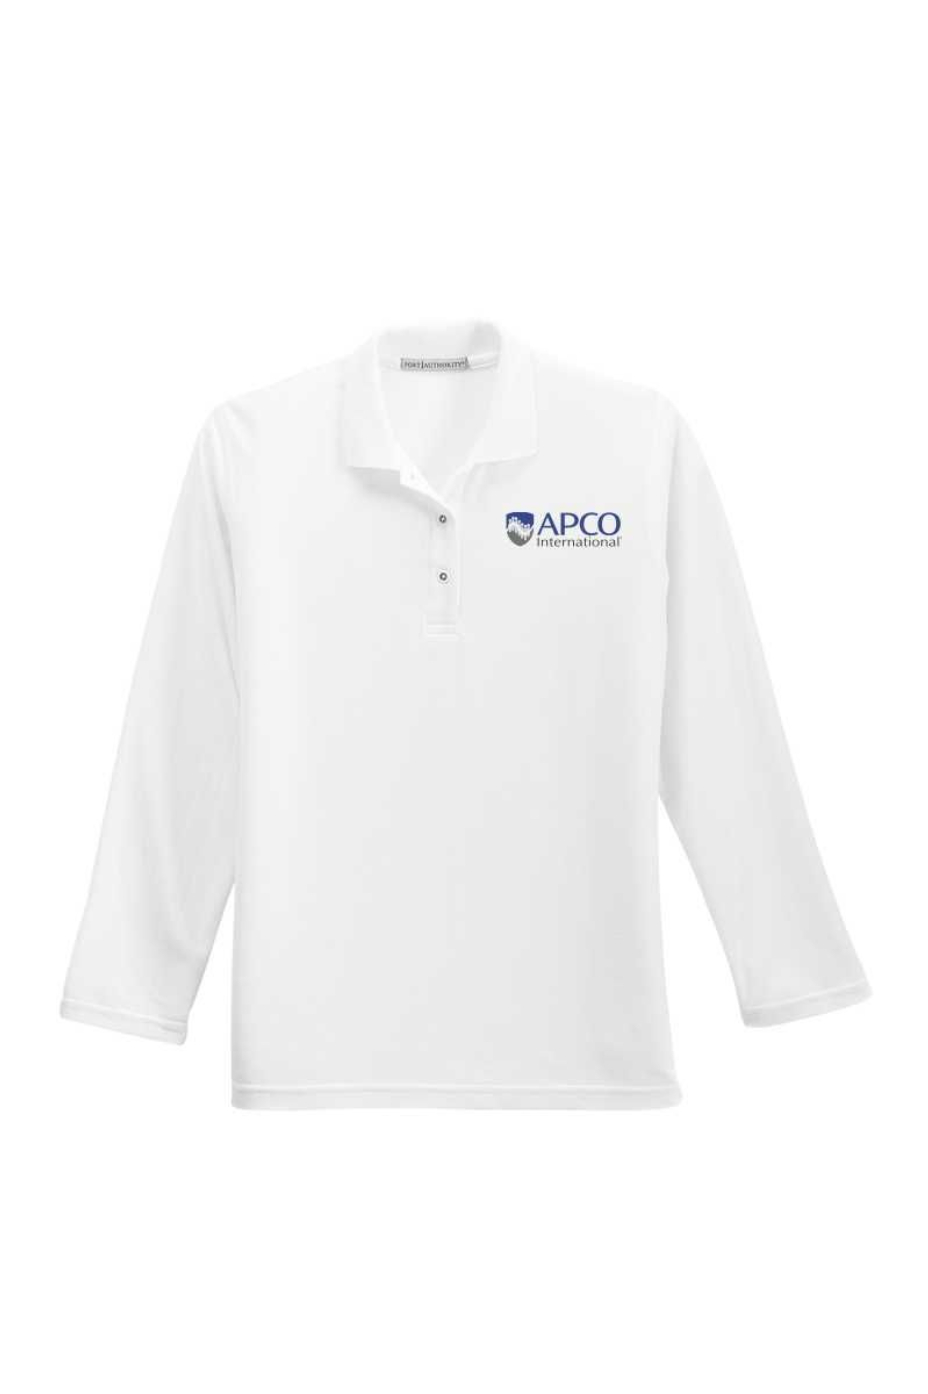 APCO - Ladies Long Sleeve Silk Touch Polo